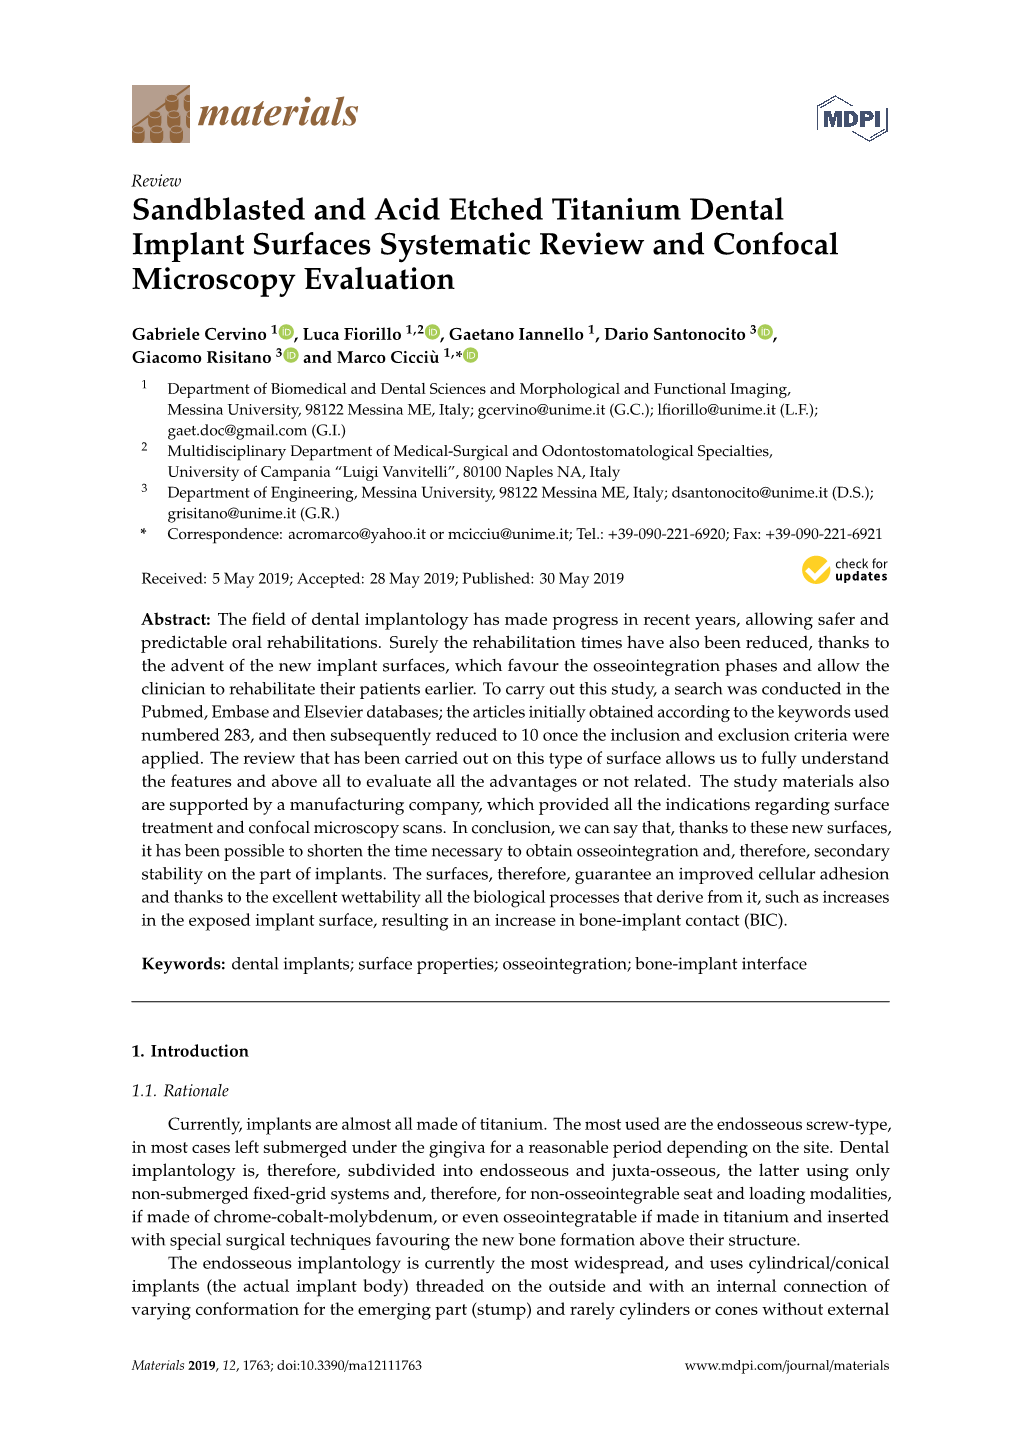 Sandblasted and Acid Etched Titanium Dental Implant Surfaces Systematic Review and Confocal Microscopy Evaluation